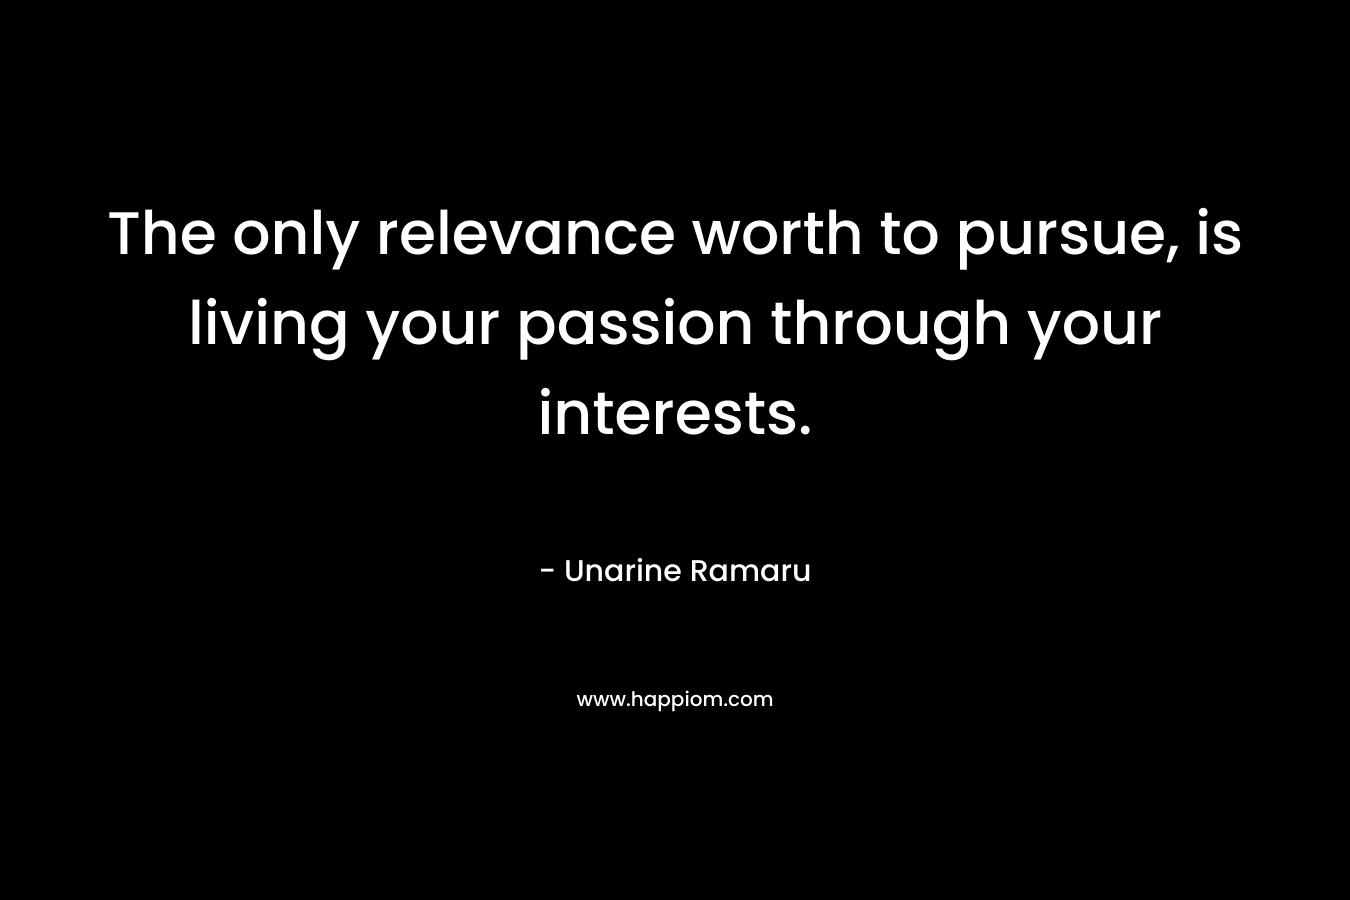 The only relevance worth to pursue, is living your passion through your interests. – Unarine Ramaru